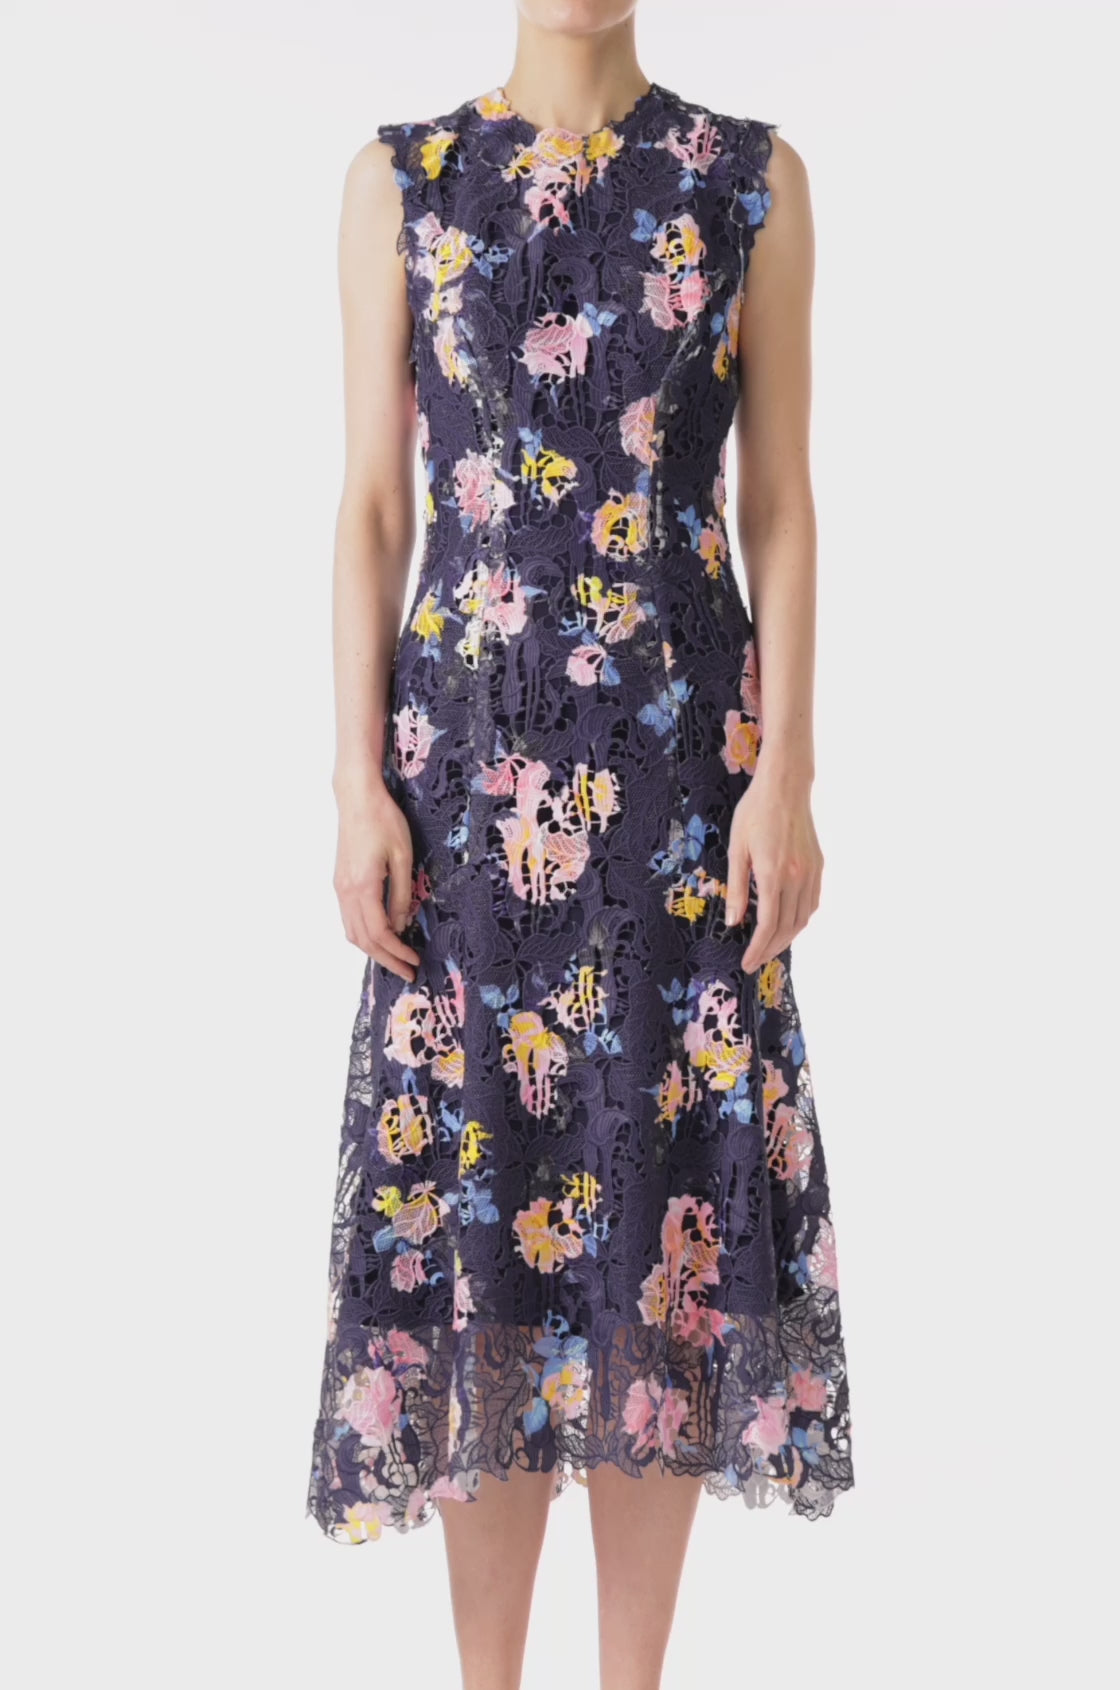 Monique Lhuillier sleeveless, midi-length dress in navy and floral printed lace.